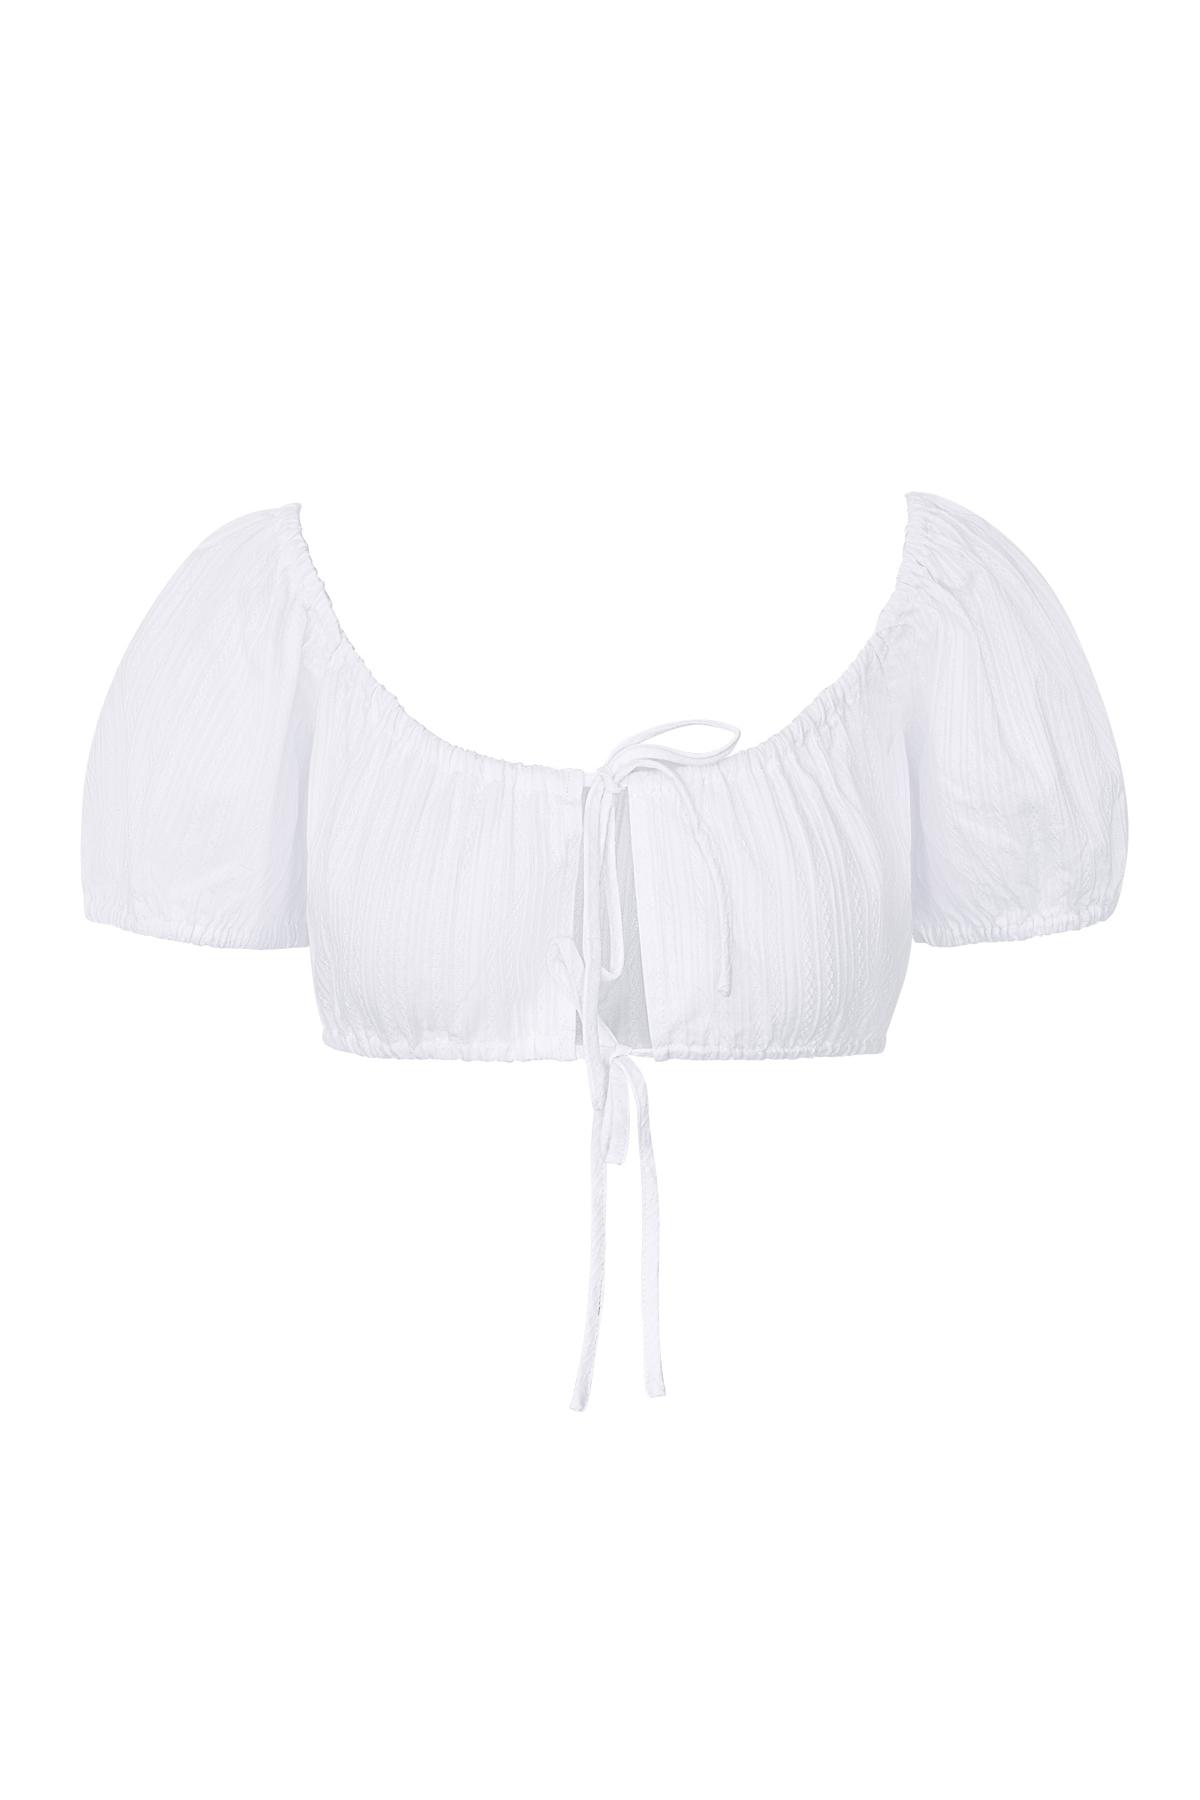 Crop top knotted White S h5 